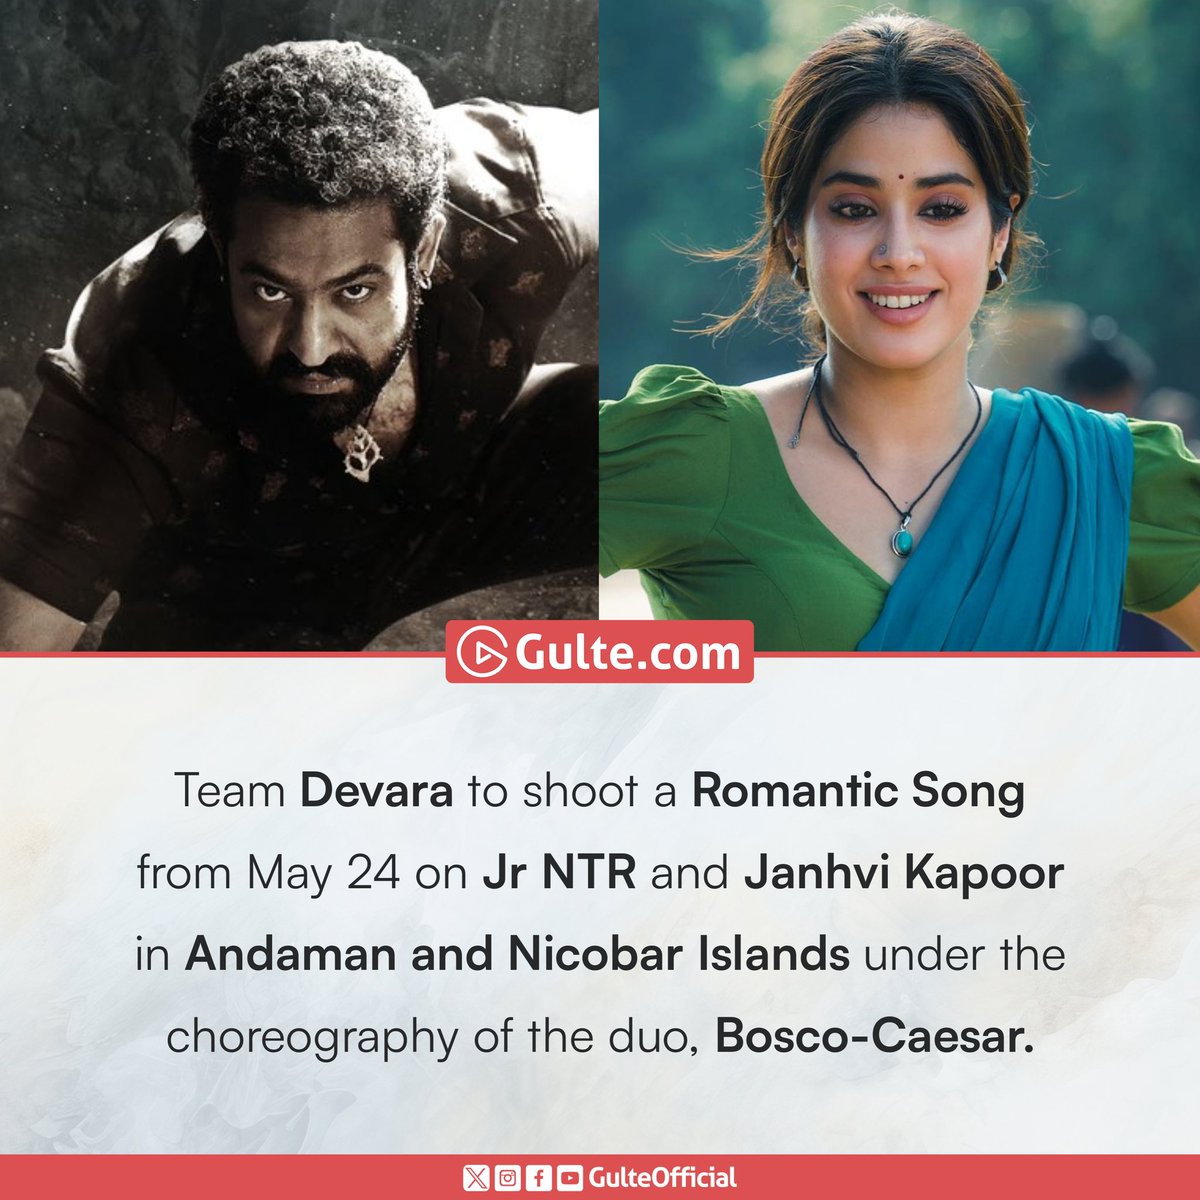 #GulteExclusive : Team #Devara to shoot a romantic song for 7 days starting from May 24. #JrNTR #JanhviKapoor